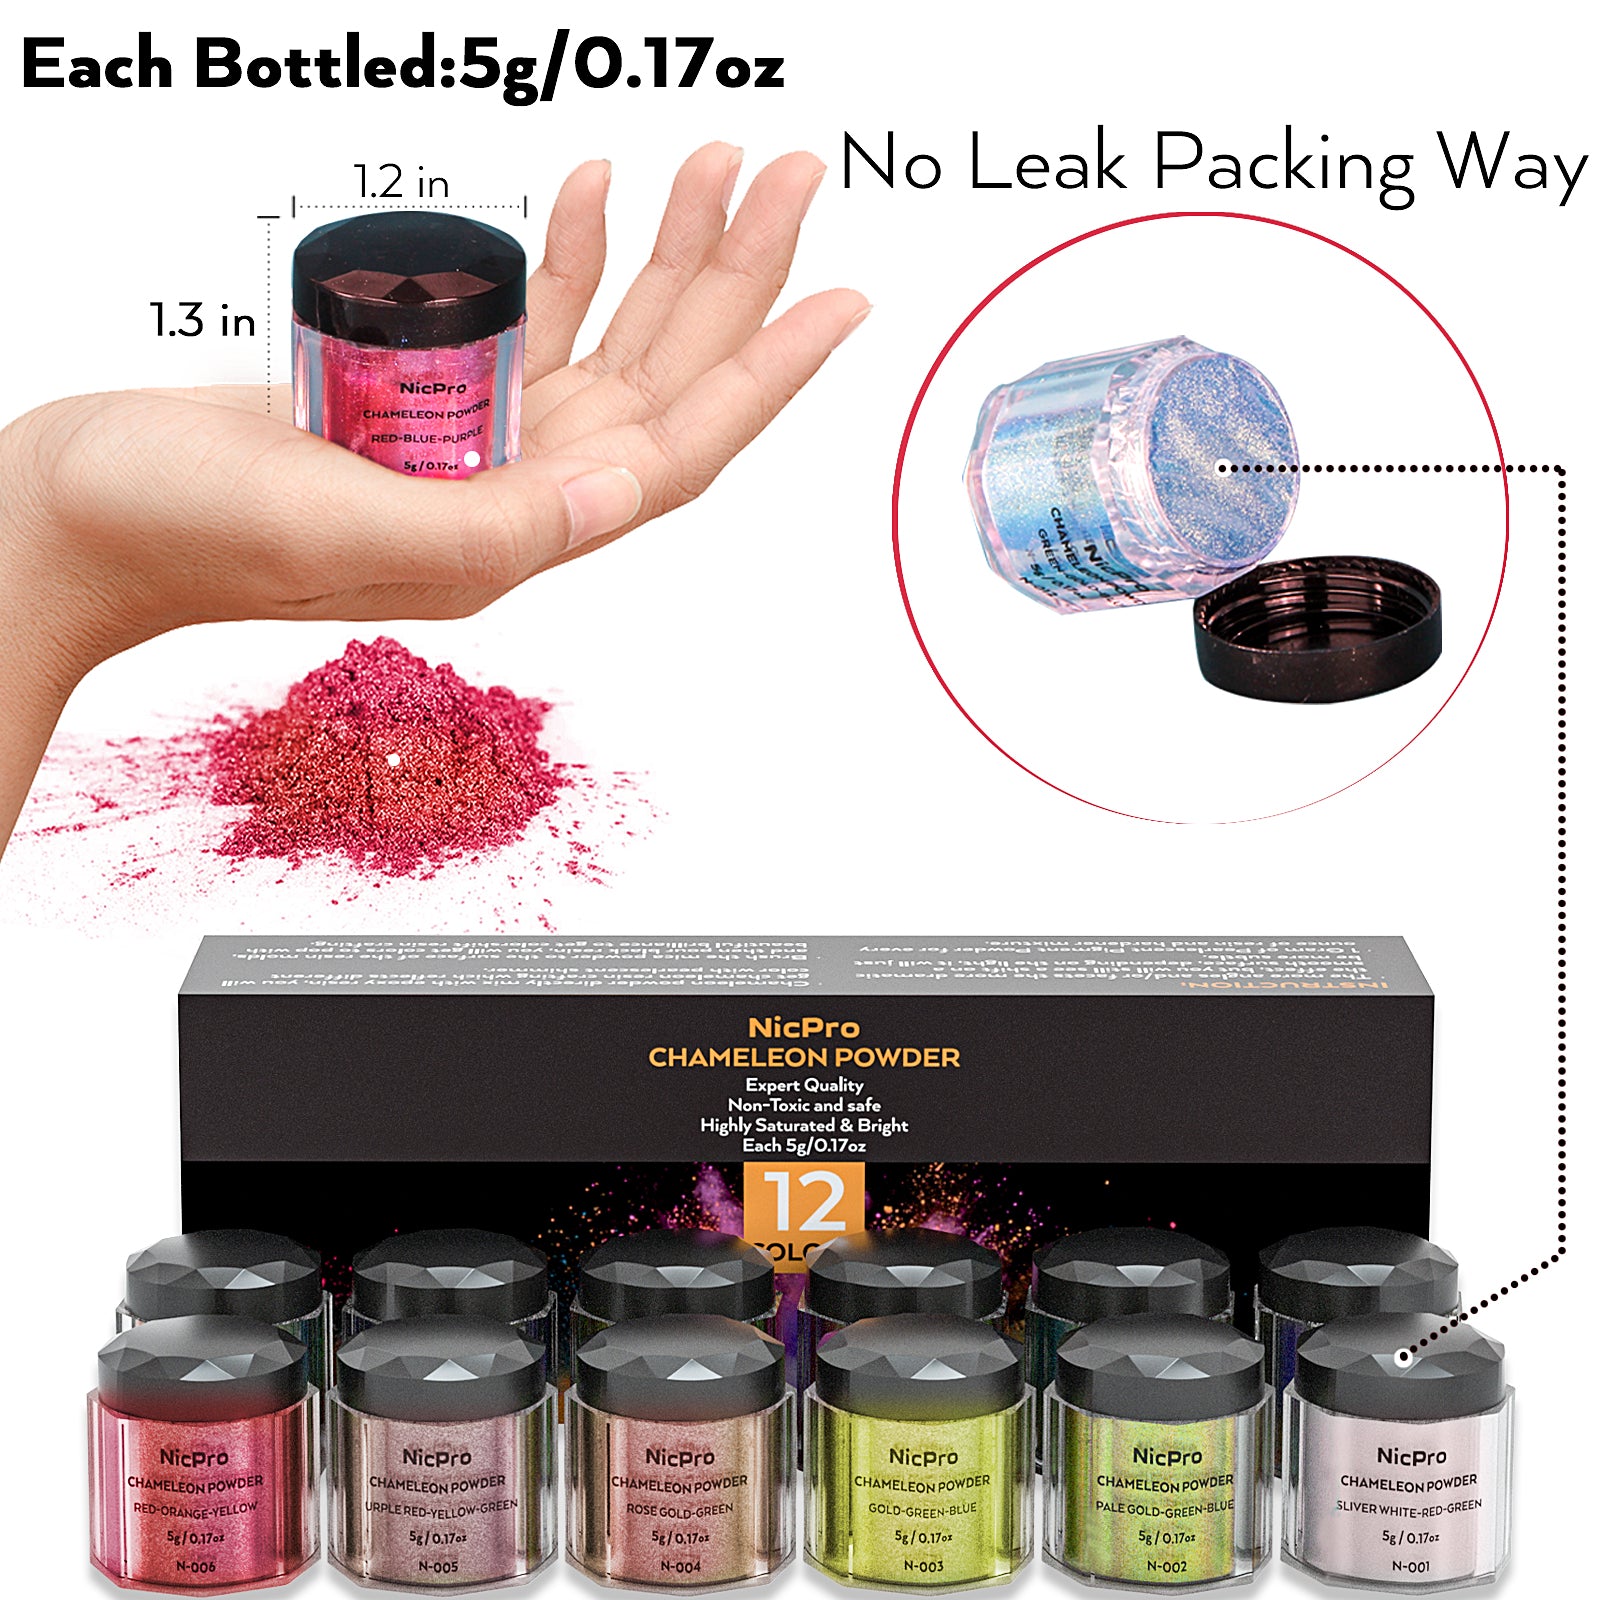 Nicpro 12 Color Chameleon Powder Set, Color-Shifting Mica Powder for Epoxy Resin, Soap HandMaking, Candle Making, Bath Bombs, Chameleon Pigment Powder for Flakes Eyeshadow, Nail Art